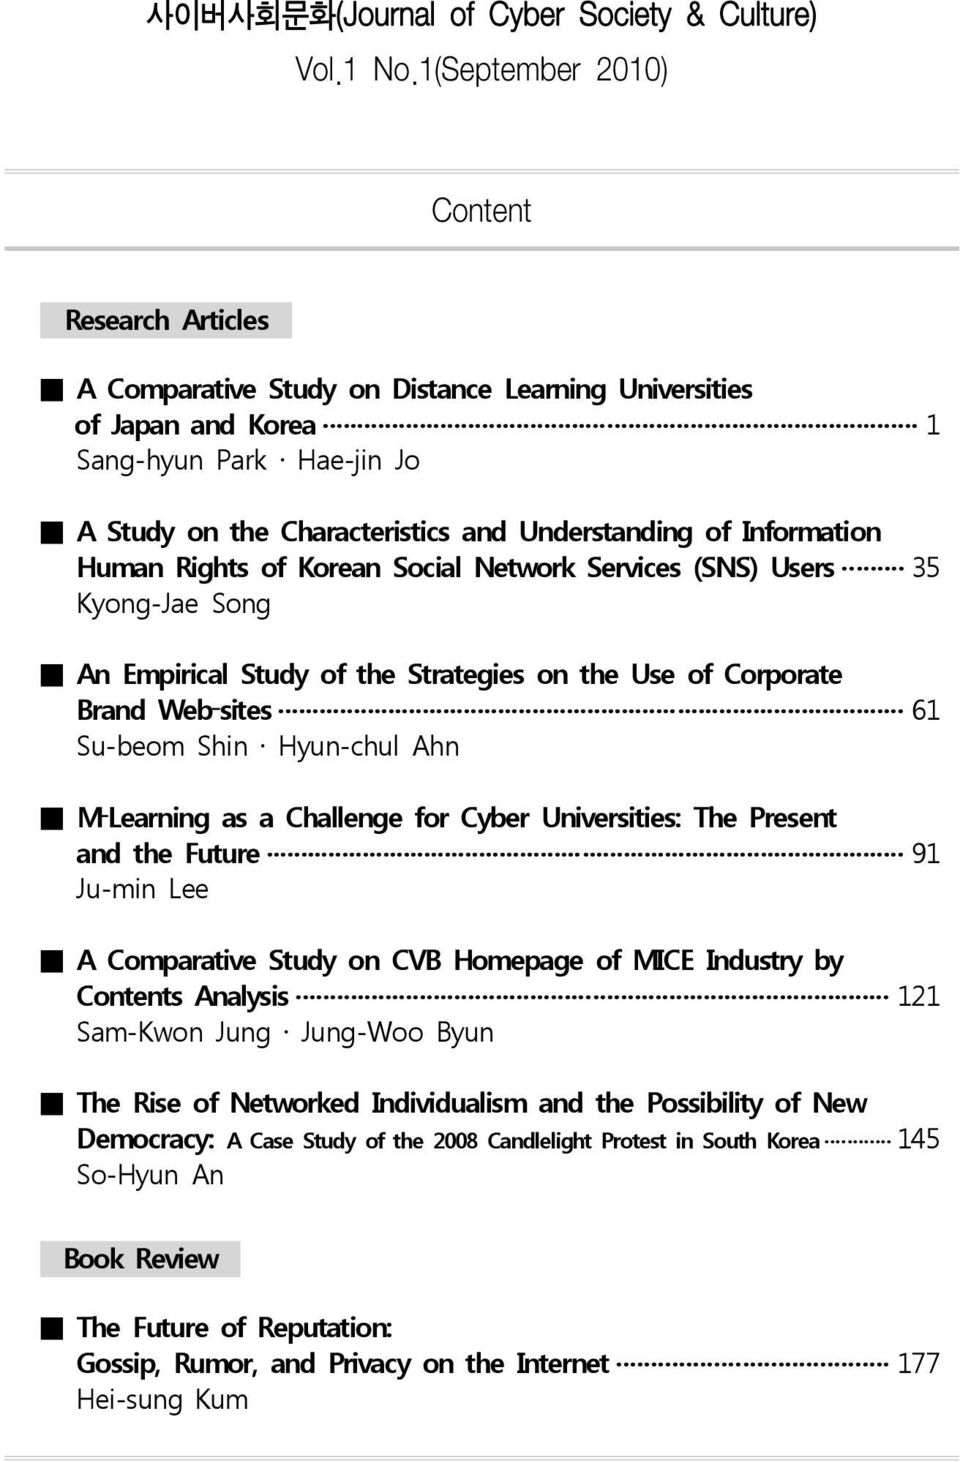 Information Human Rights of Korean Social Network Services (SNS) Users 35 Kyong-Jae Song An Empirical Study of the Strategies on the Use of Corporate Brand Web sites 61 Su-beom Shin Hyun-chul Ahn M